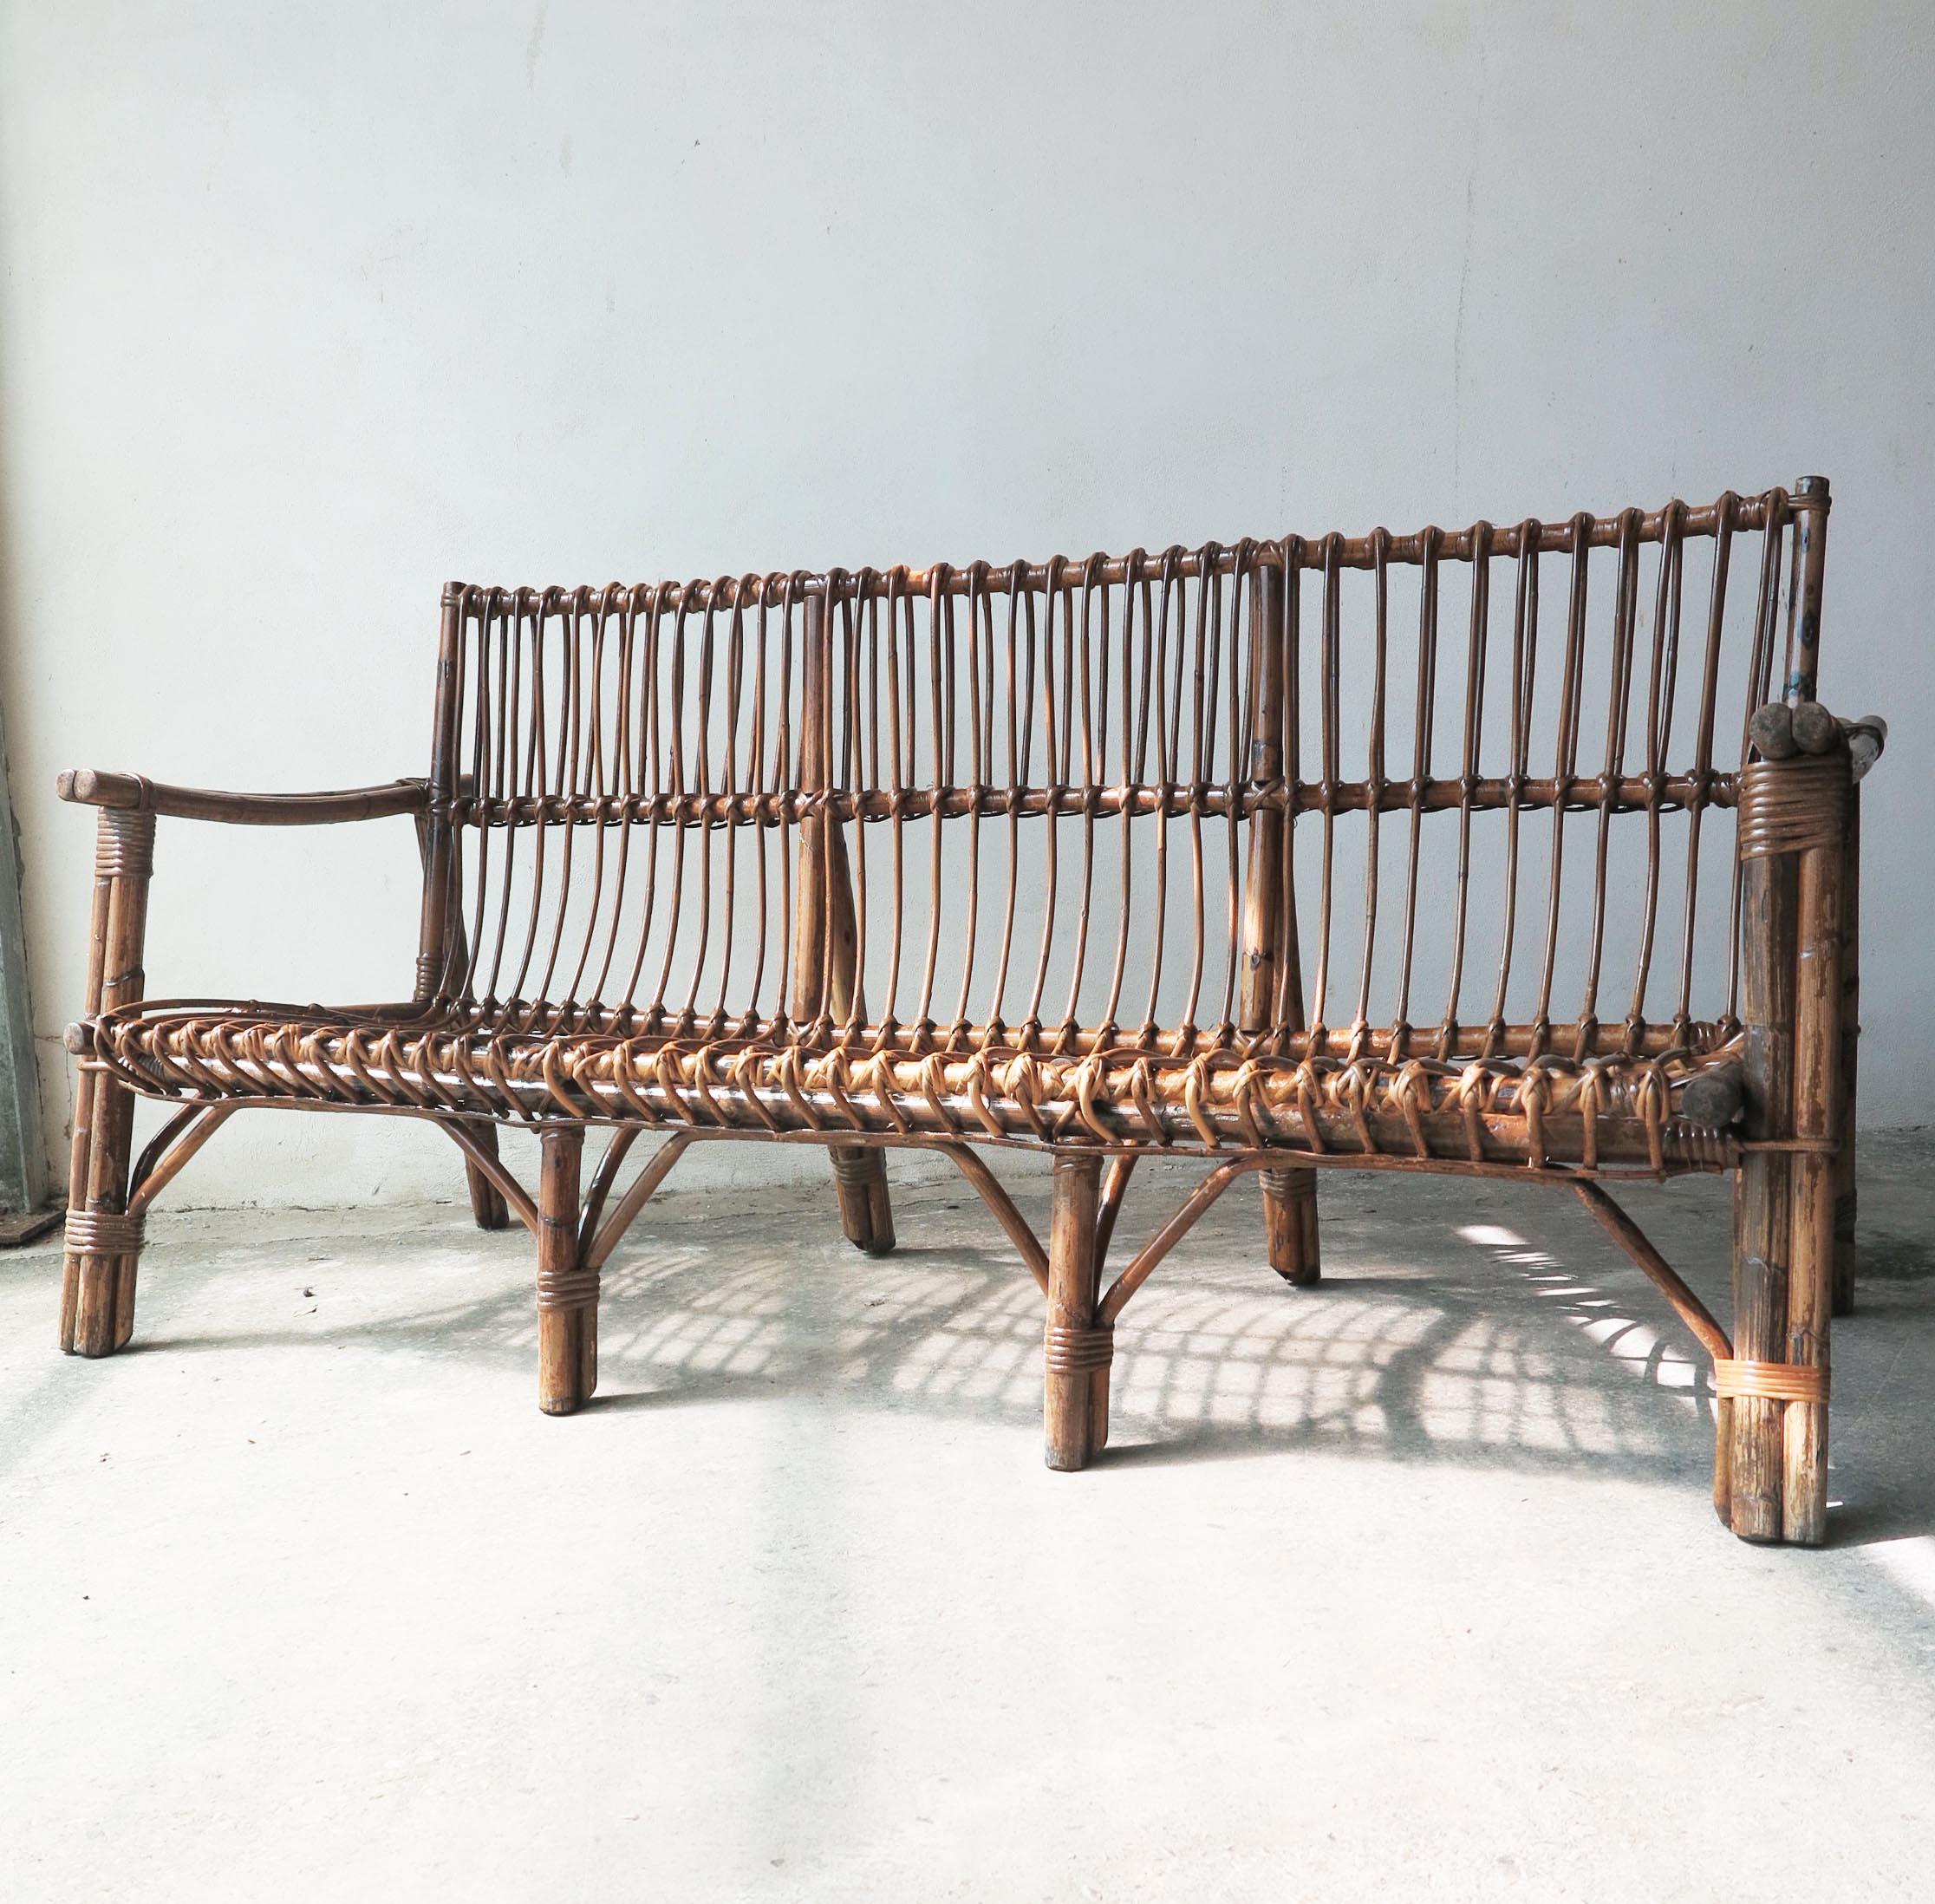 Italian midcentury bamboo sofa with three-seat, completely Restored, 1950s.
The sofa has a beautiful shape, elegant and pure.
There is a perfect match between small cylindrical section of rattan and big section of bamboo canes.